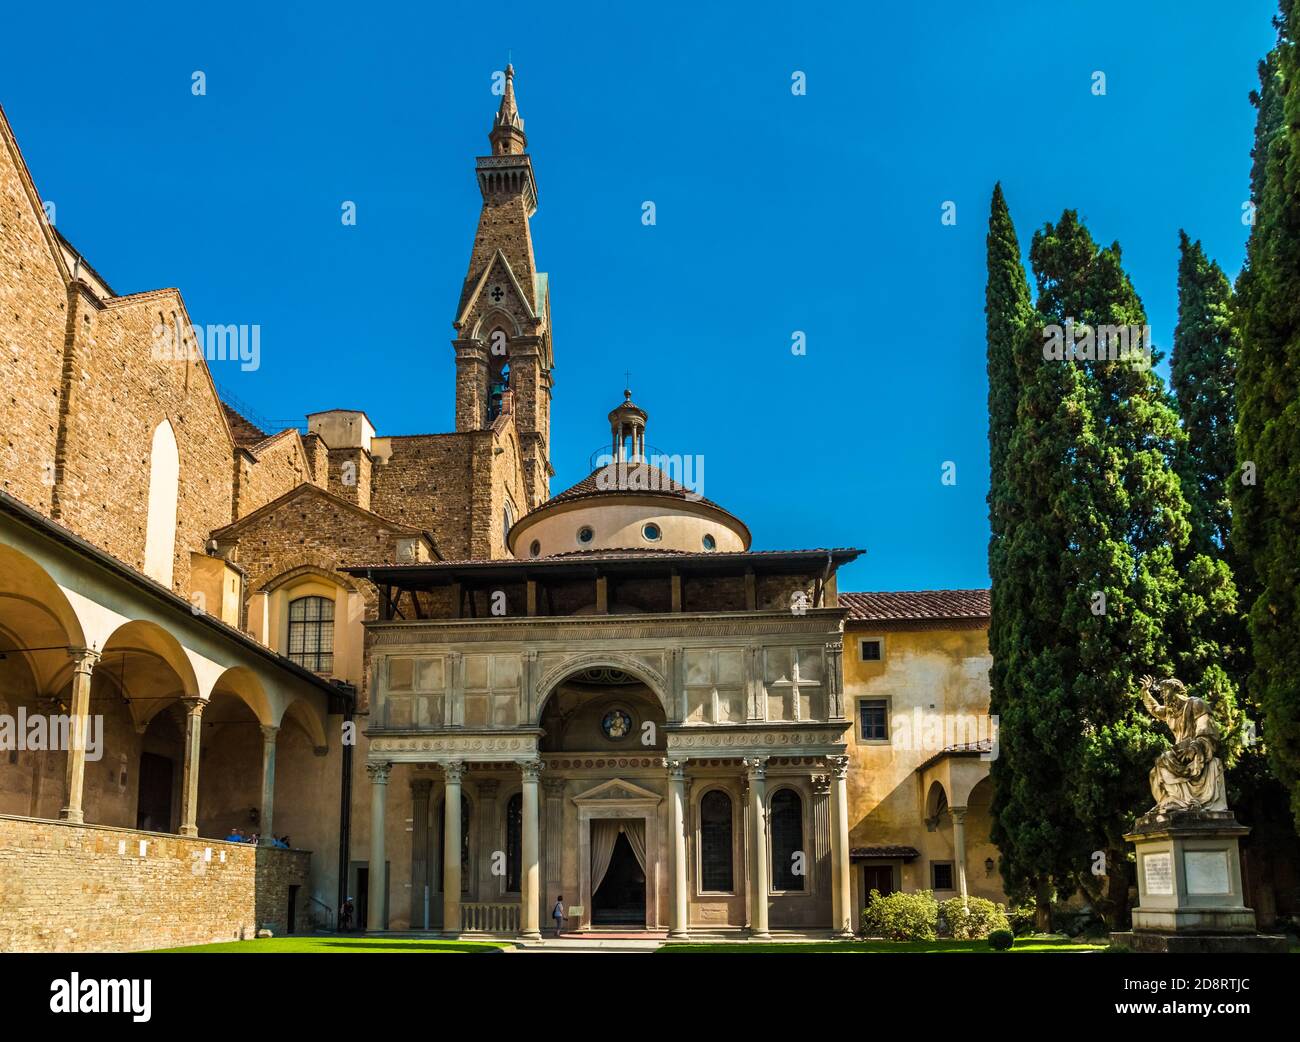 Gorgeous close-up view of the Pazzi Chapel in the cloister of the Basilica di Santa Croce in Florence, Italy. It has an arched portal topped by a... Stock Photo